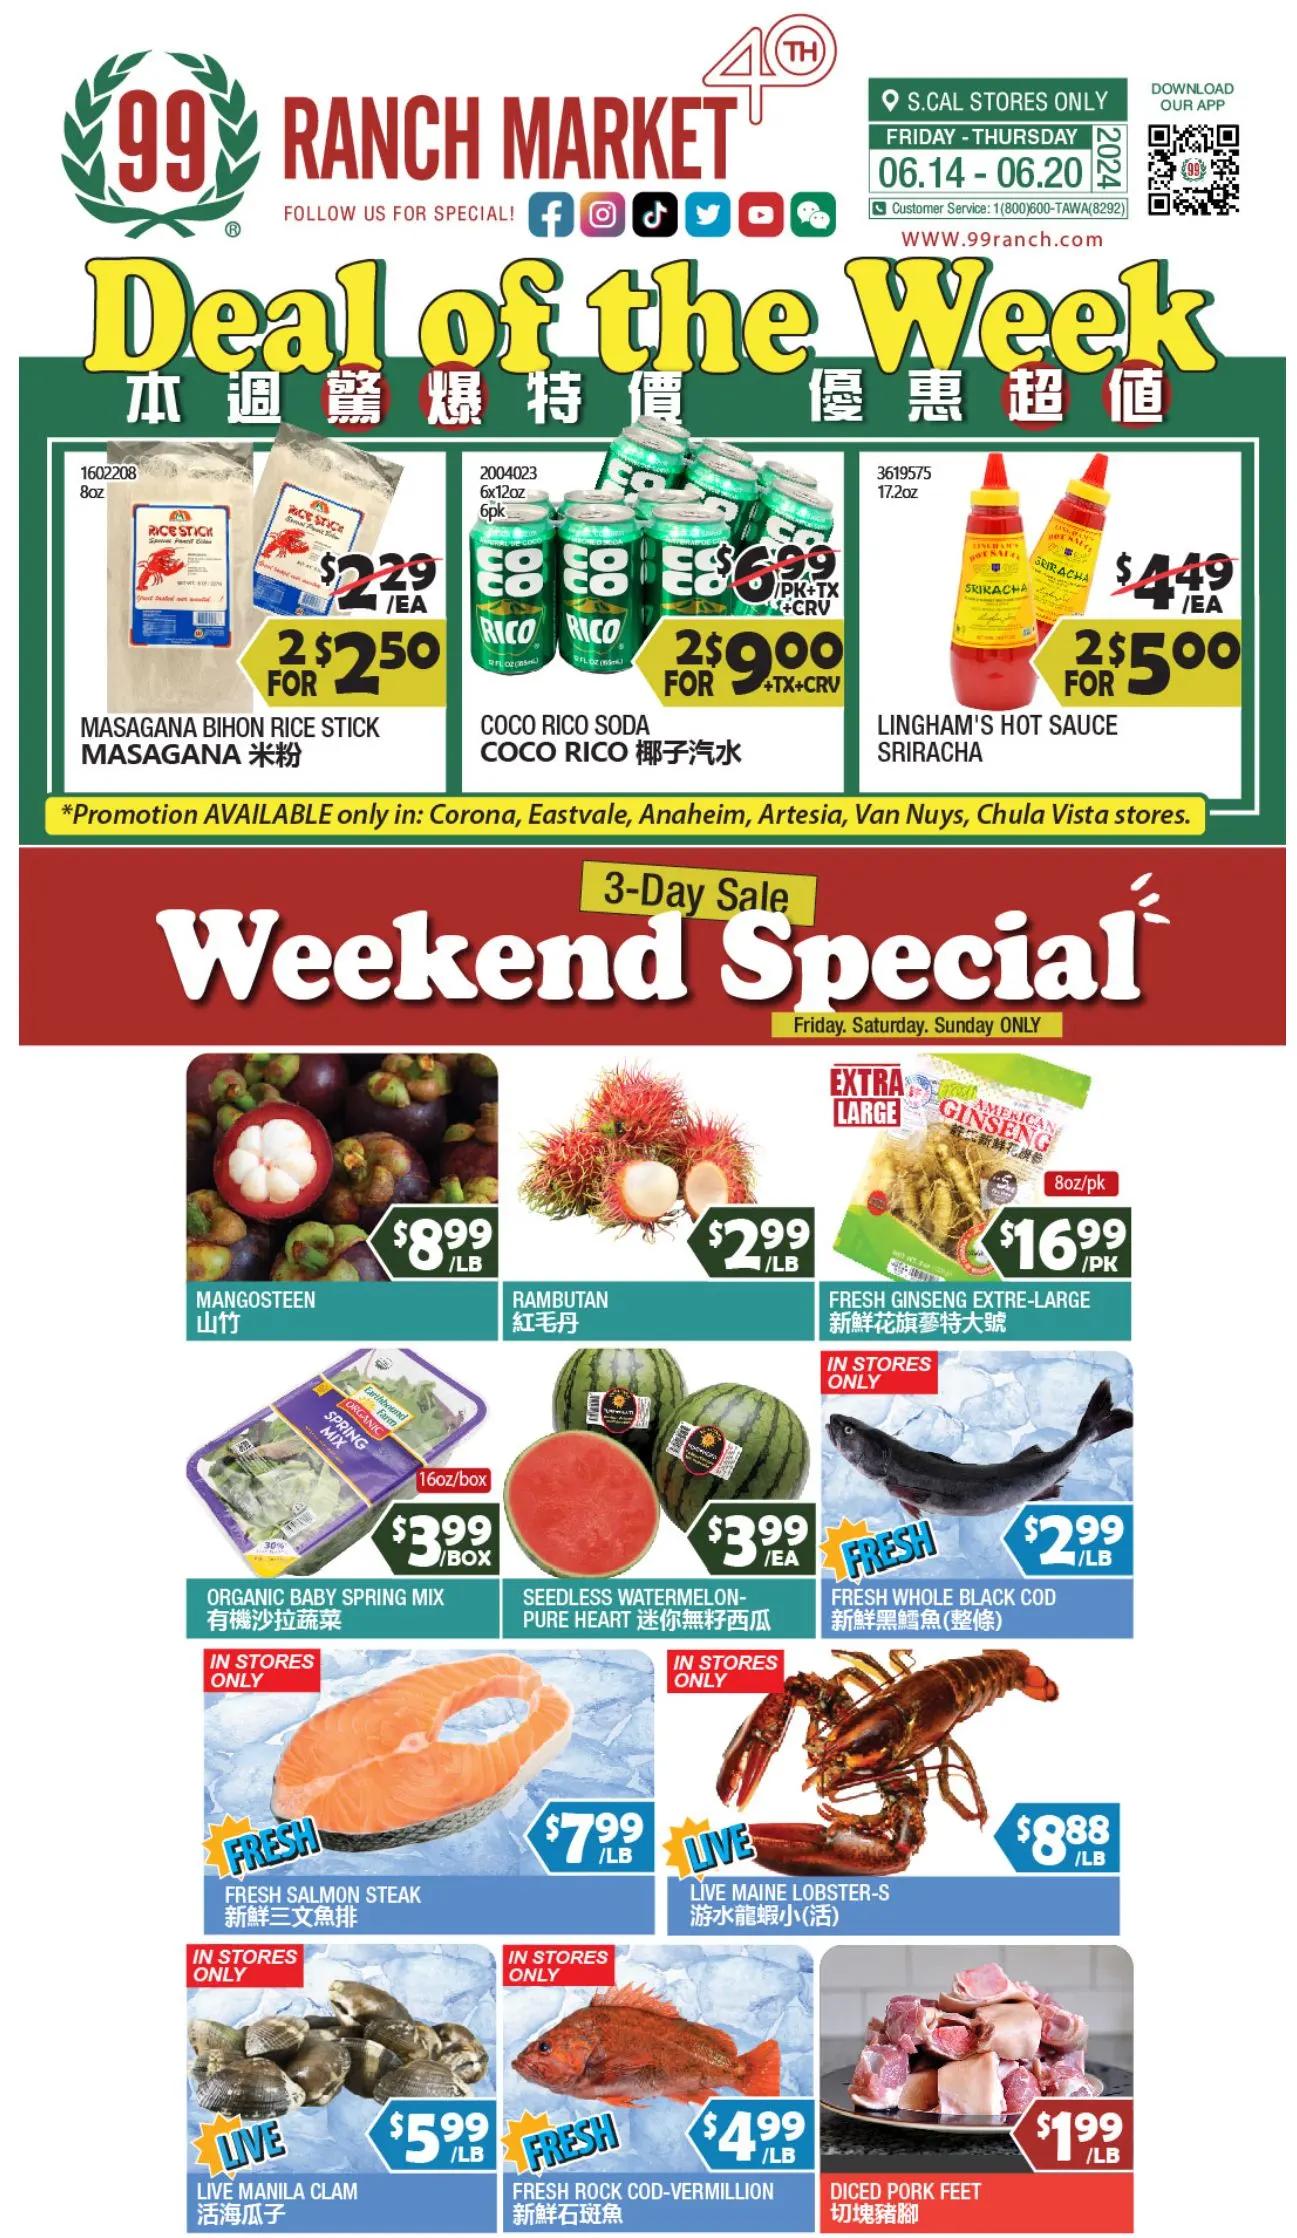 99 Ranch Market Weekly Ad July 2024 Weekly Sales, Deals, Discounts and Digital Coupons.